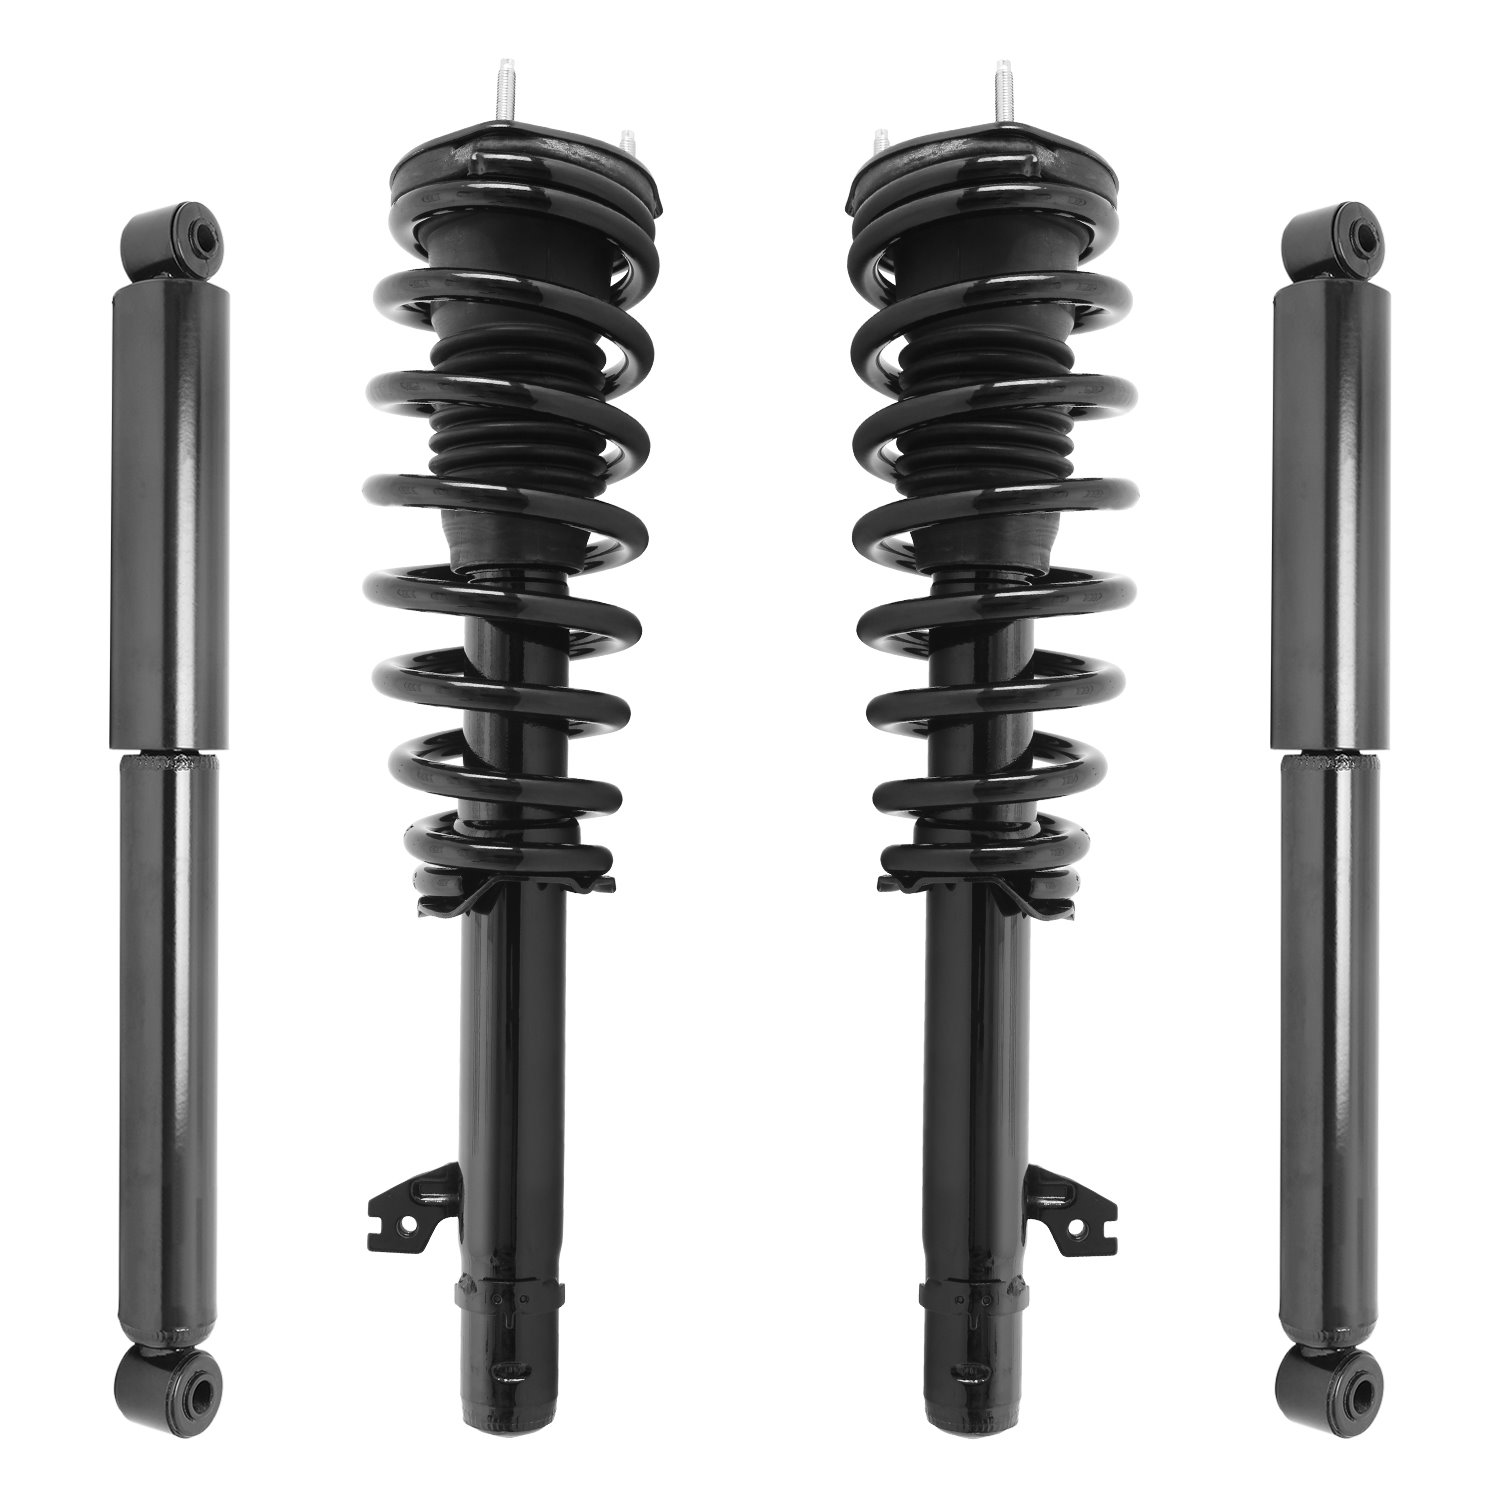 4-11985-259040-001 Front & Rear Suspension Strut & Coil Spring Assembly Fits Select Mazda 6